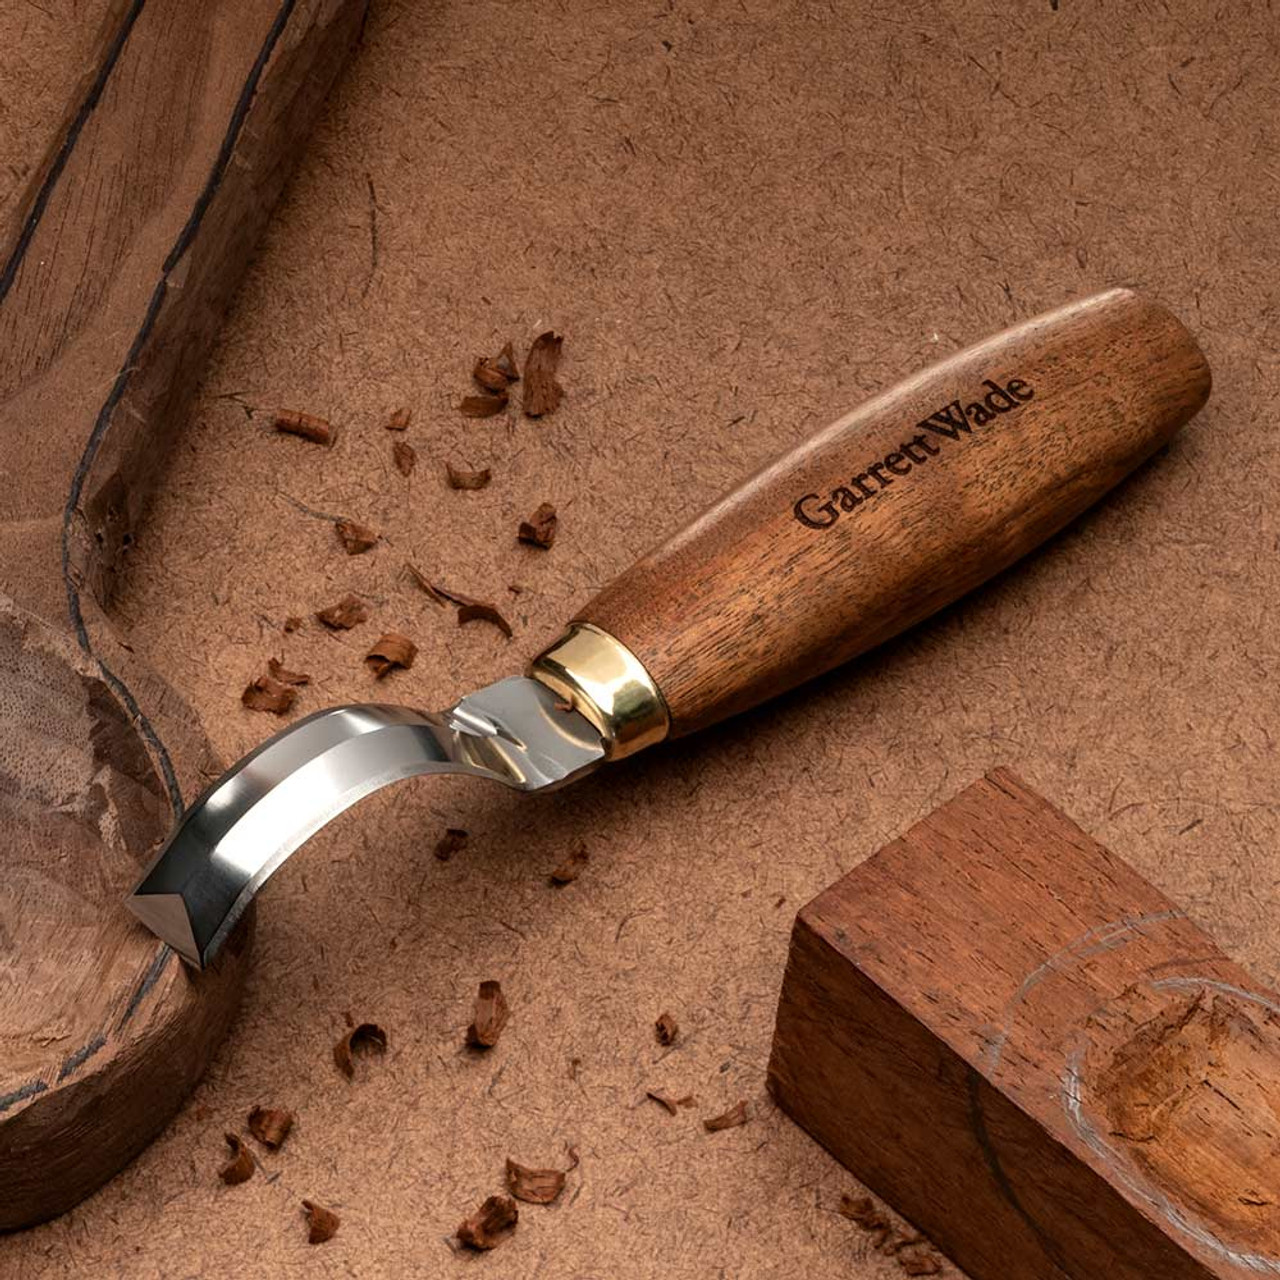 Spoon Carving Set, Explore Woodworking Tools